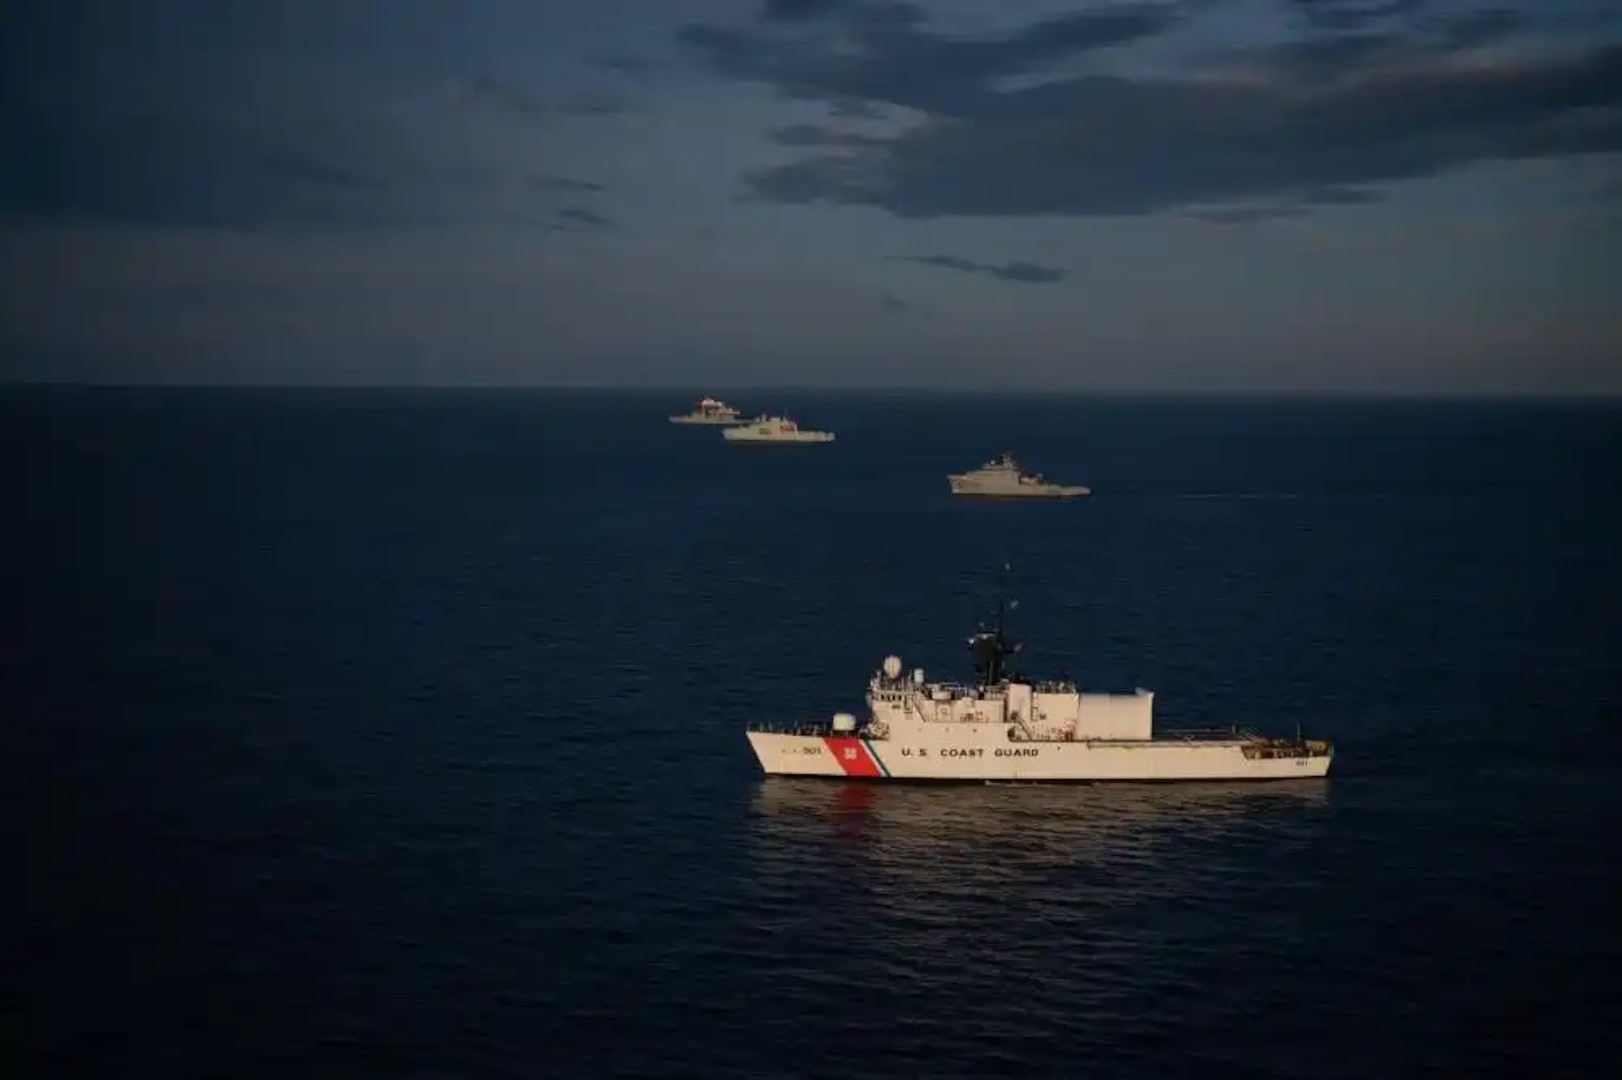 USCGC Bear (WMEC 901) is seen from the left side of a formation during a photo exercise (PHOTOEX) as a part of Operation Nanook, Northern Atlantic Ocean, Aug. 6, 2022. Bear is partaking in the Tuugaalik phase of Operation Nanook, an annual exercise that allows the United States and multiple other partner nations to ensure security and enhance interoperability in Arctic waters. (U.S. Coast Guard photo by Petty Officer 3rd Class Matthew Abban)